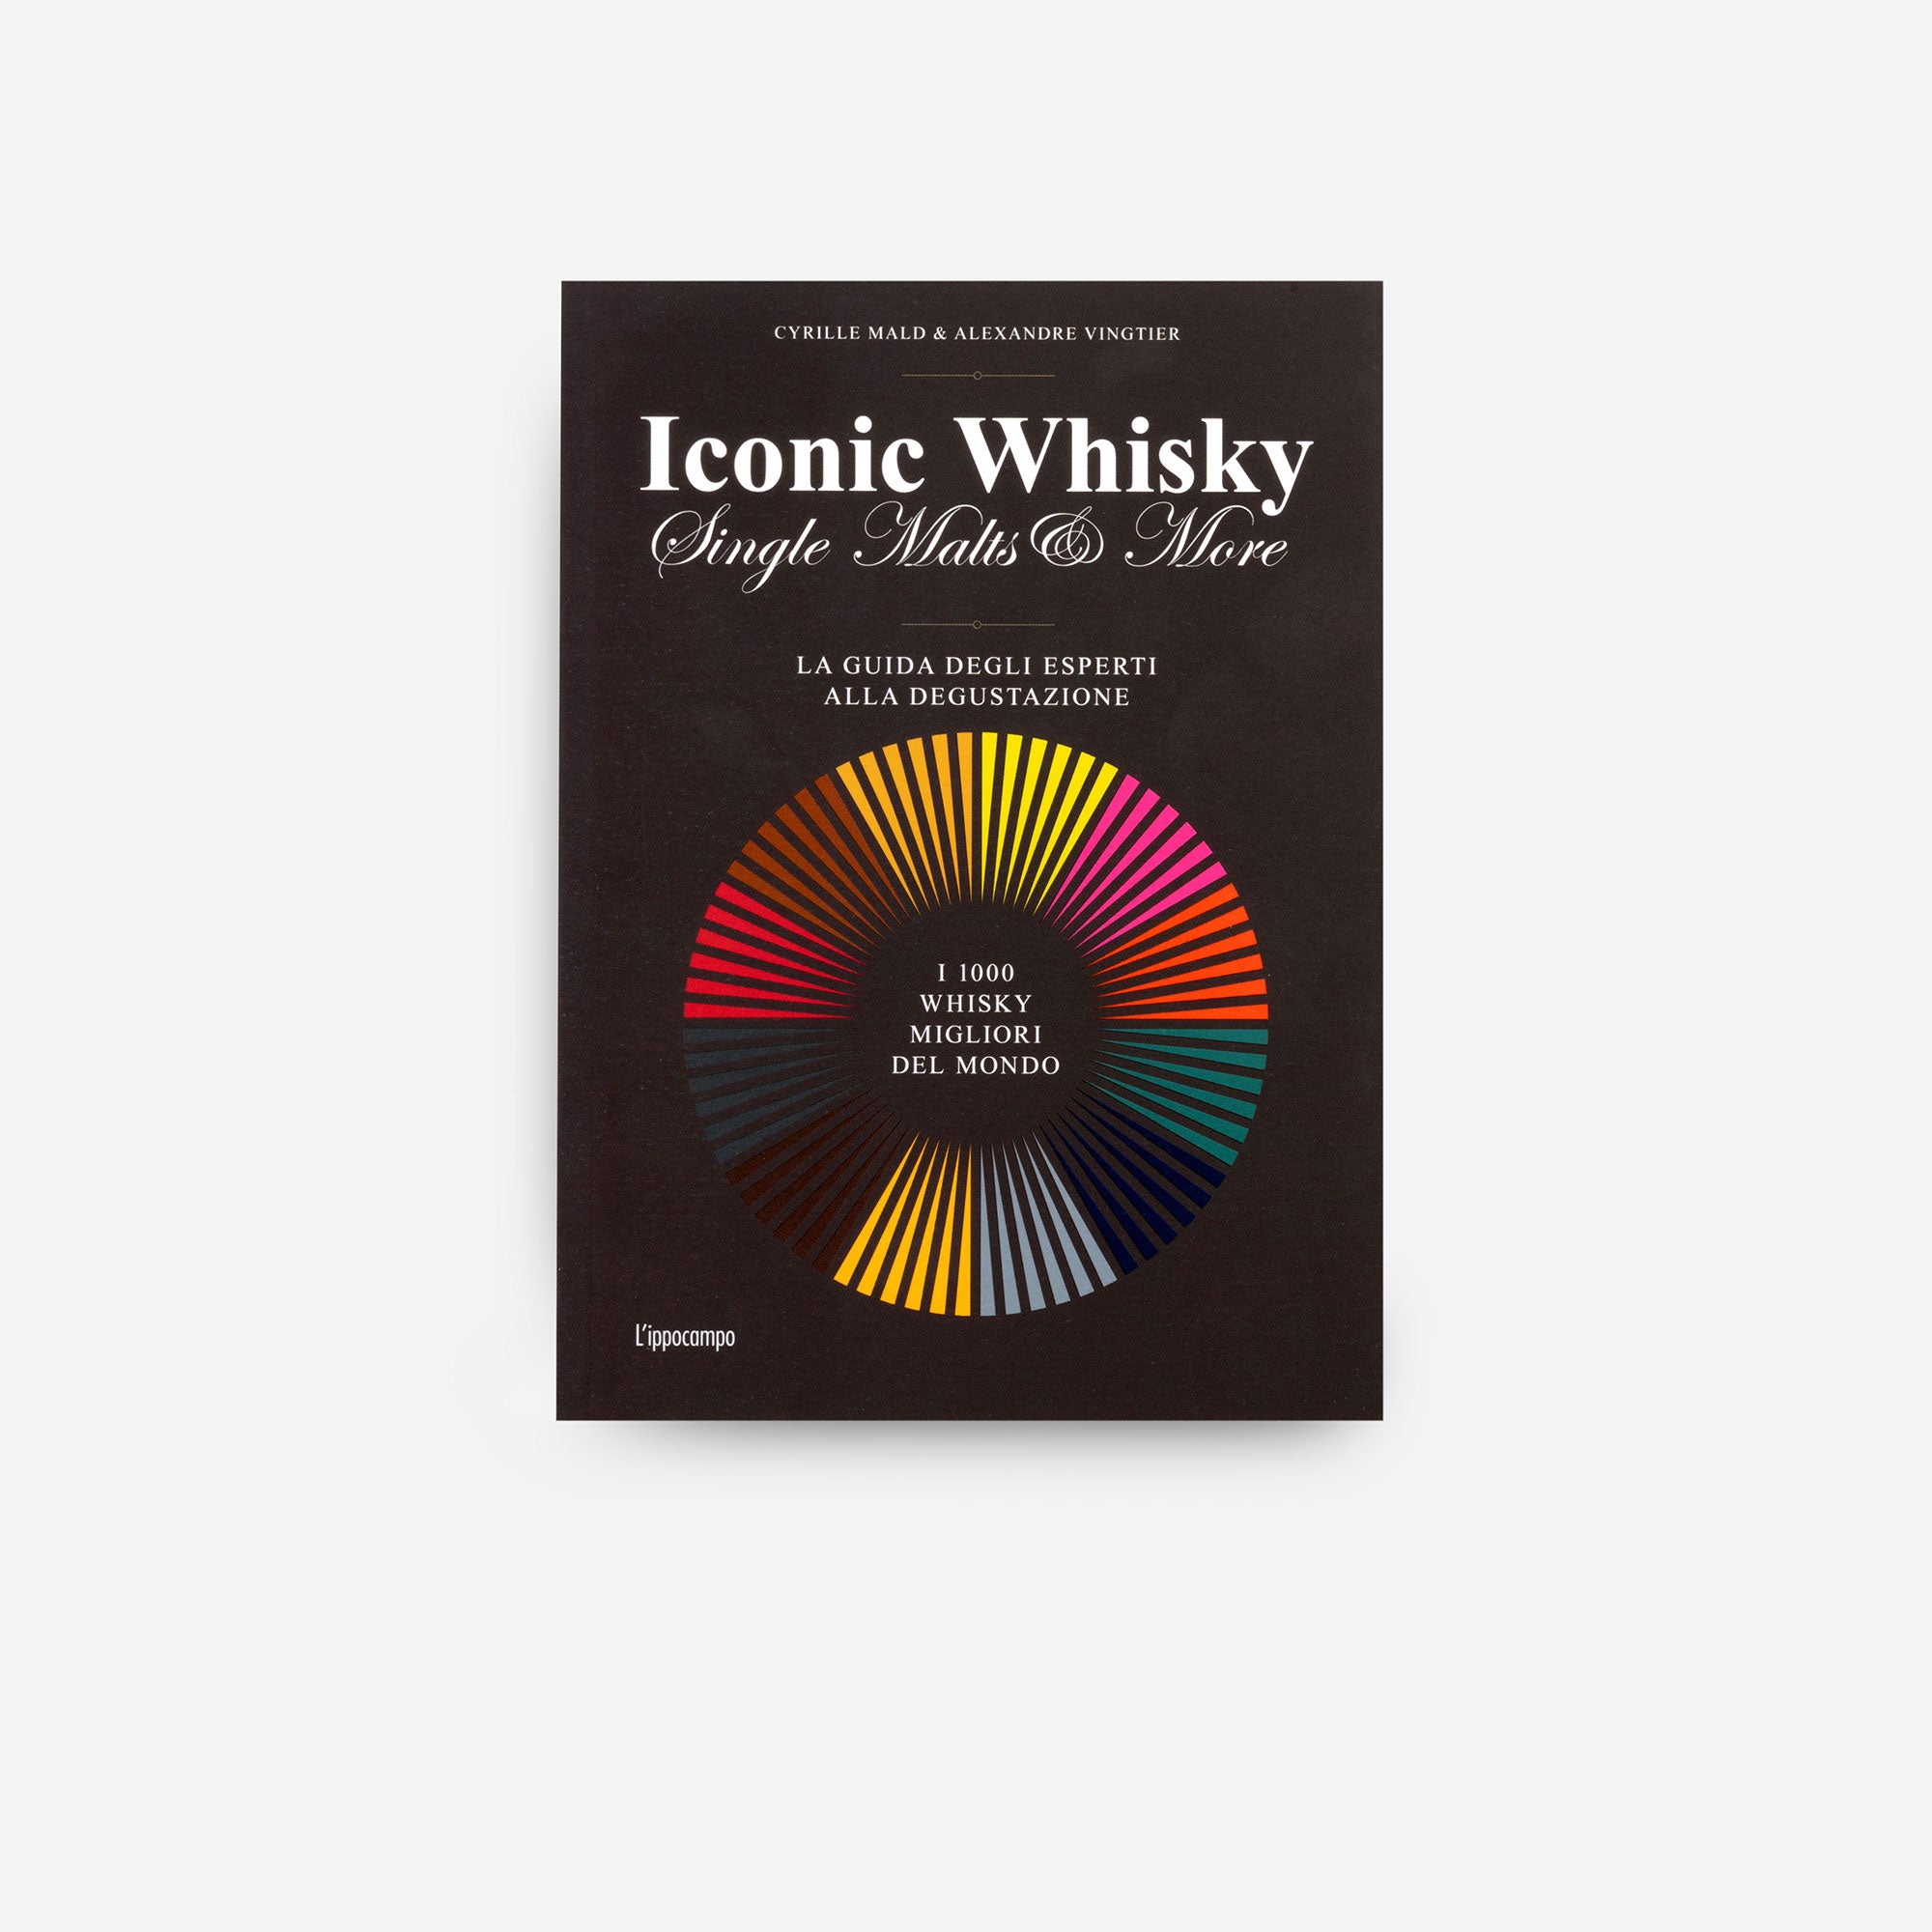 Iconic Whisky - Single malts & more